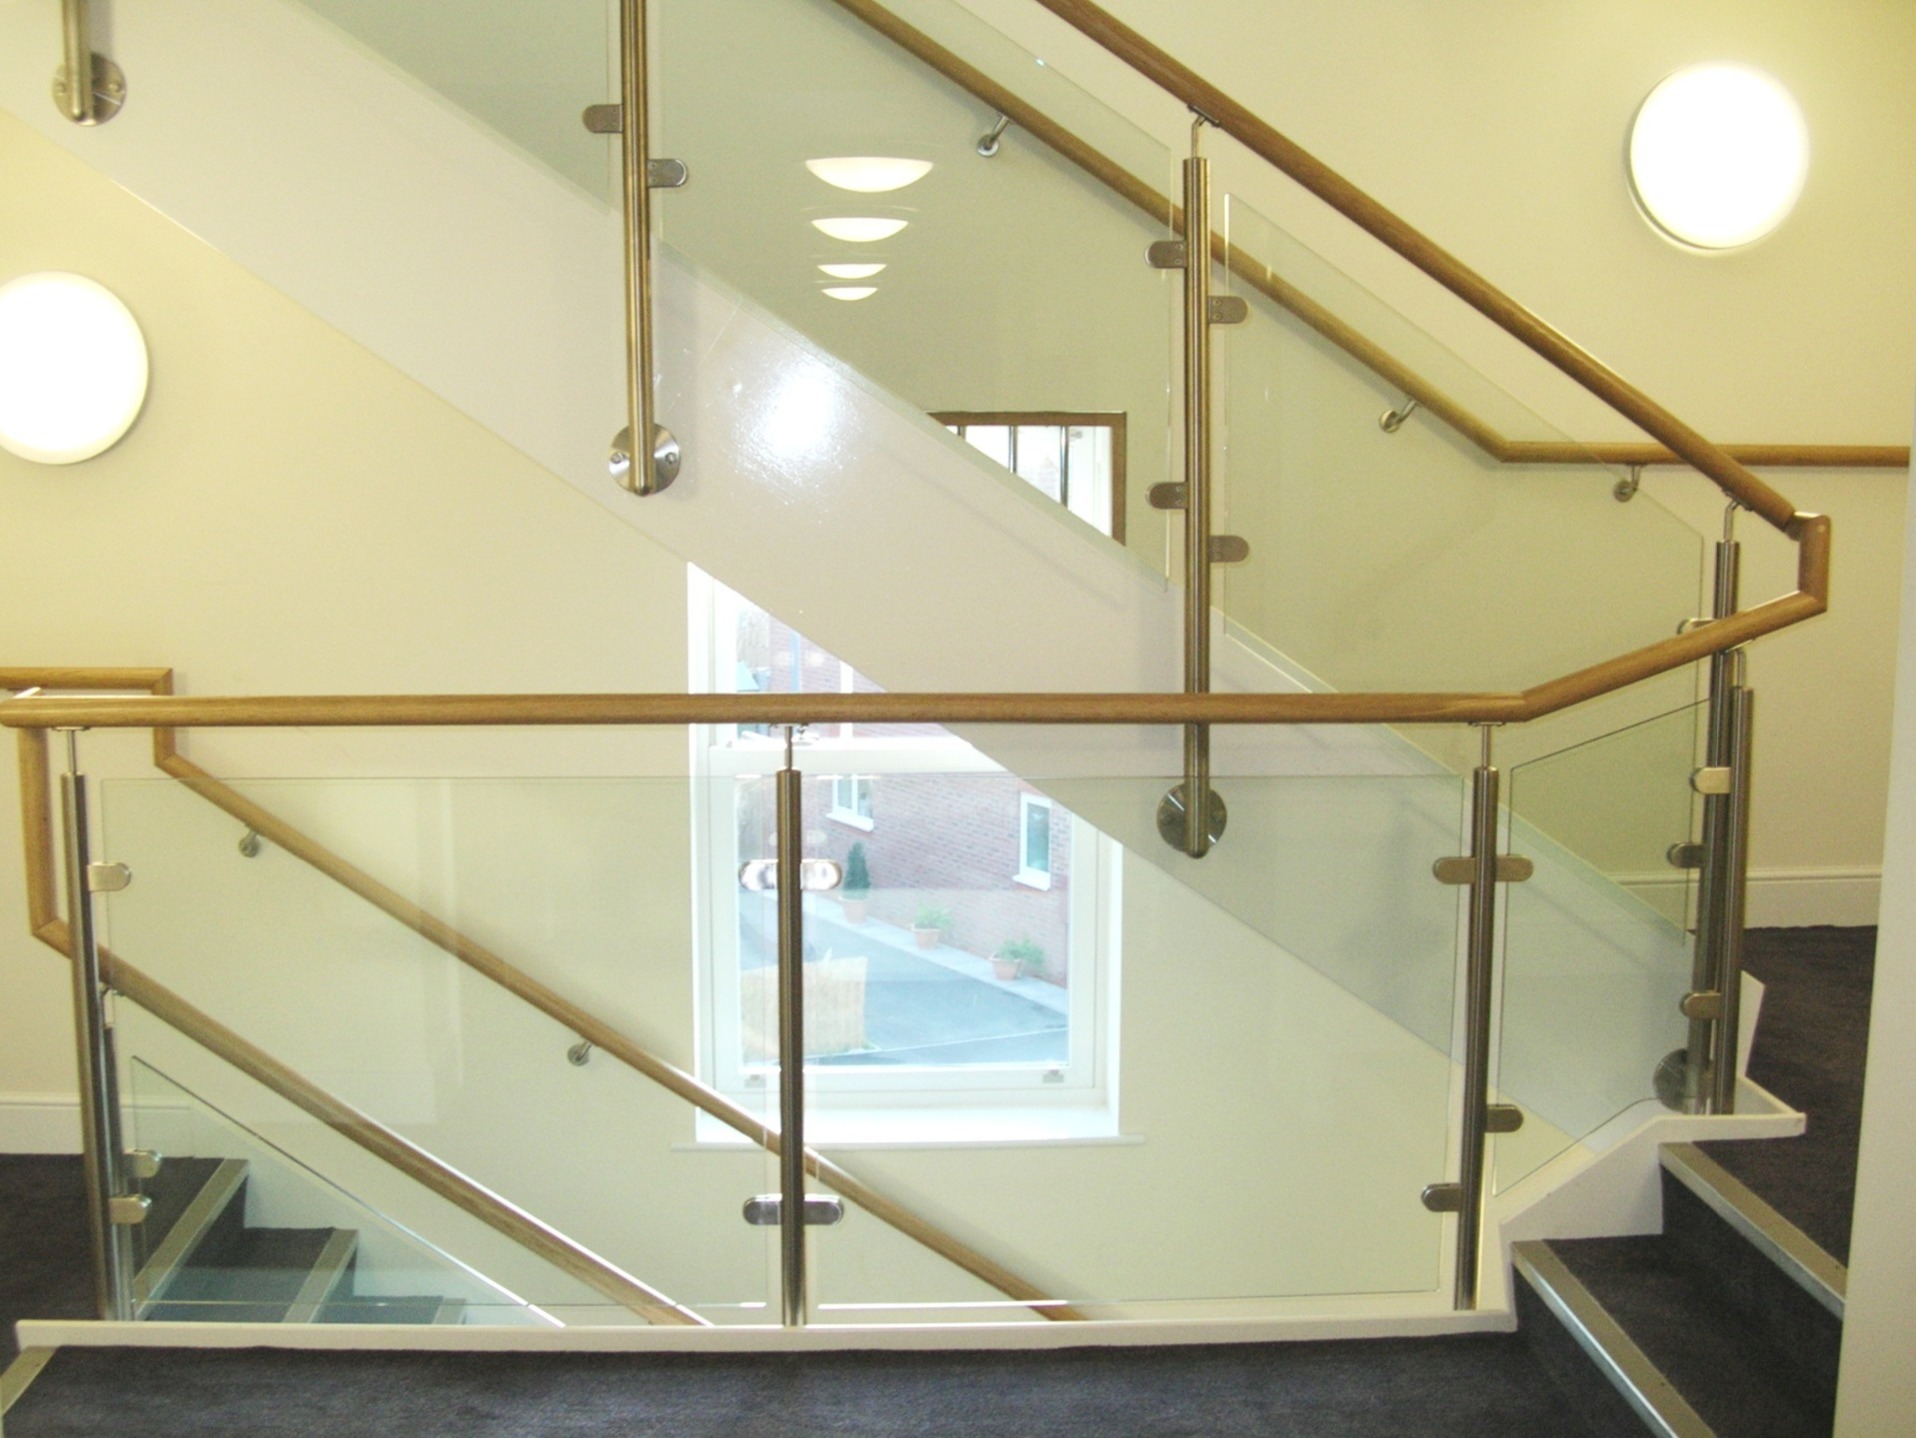 Stainless Steel & Glass Stair Balustrade with Timber Handrails